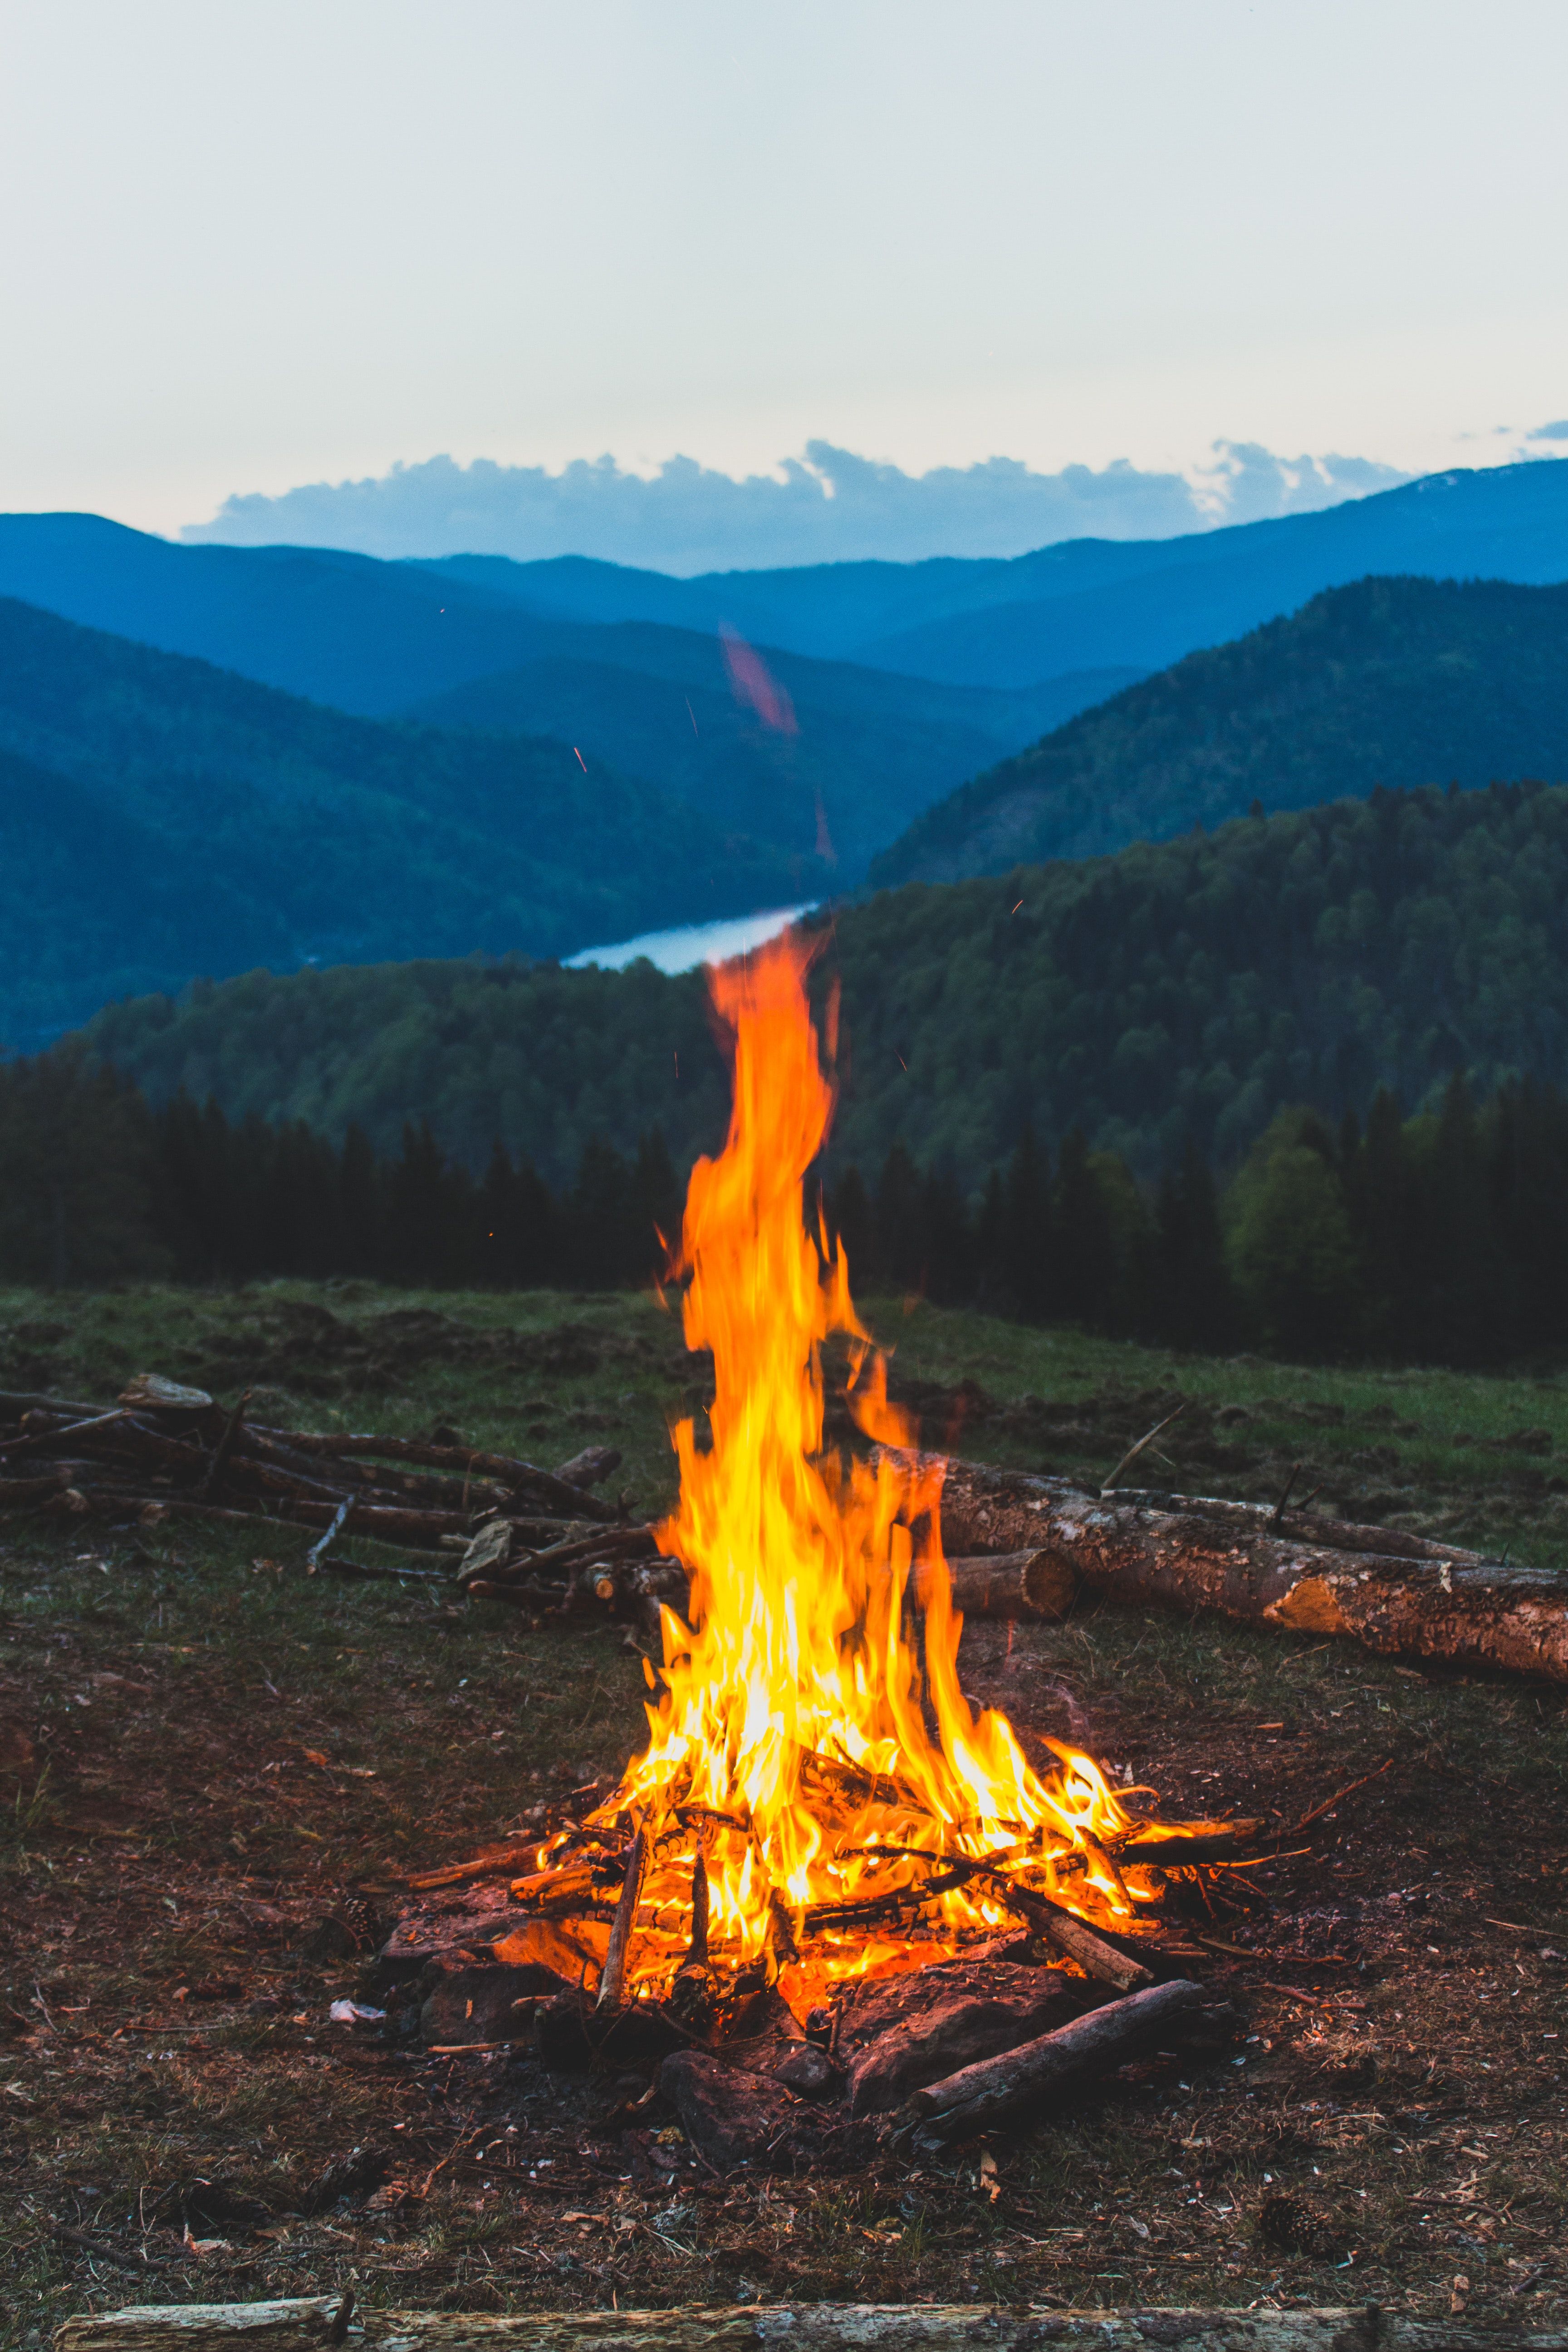 A bonfire burns in the foreground of a mountain landscape. - Camping